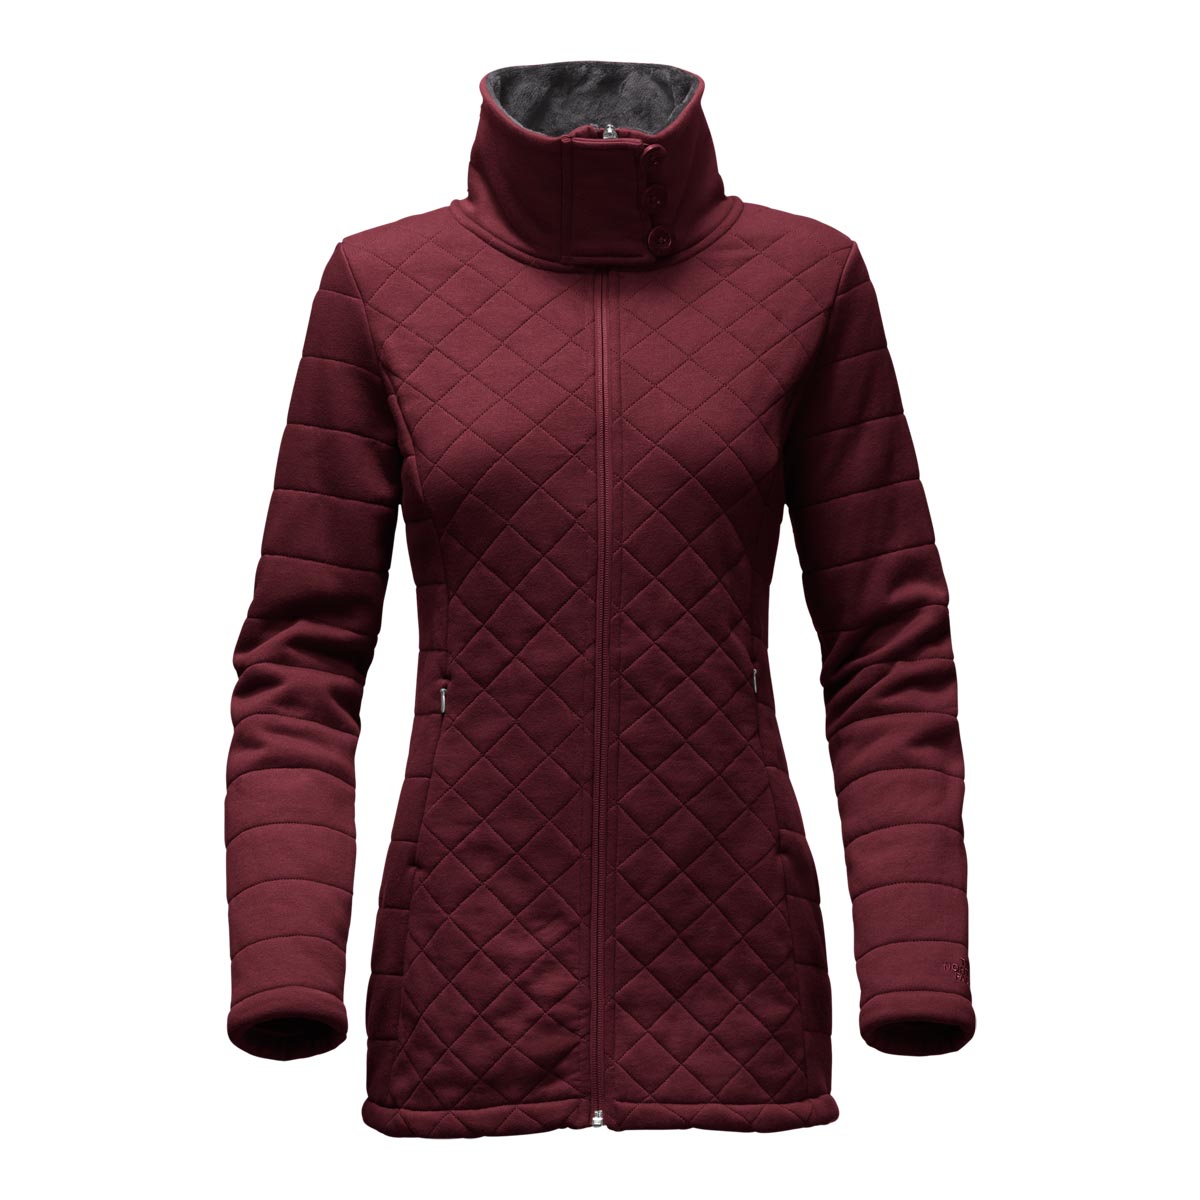 The North Face Womens Caroluna Jacket Discontinued Pricing